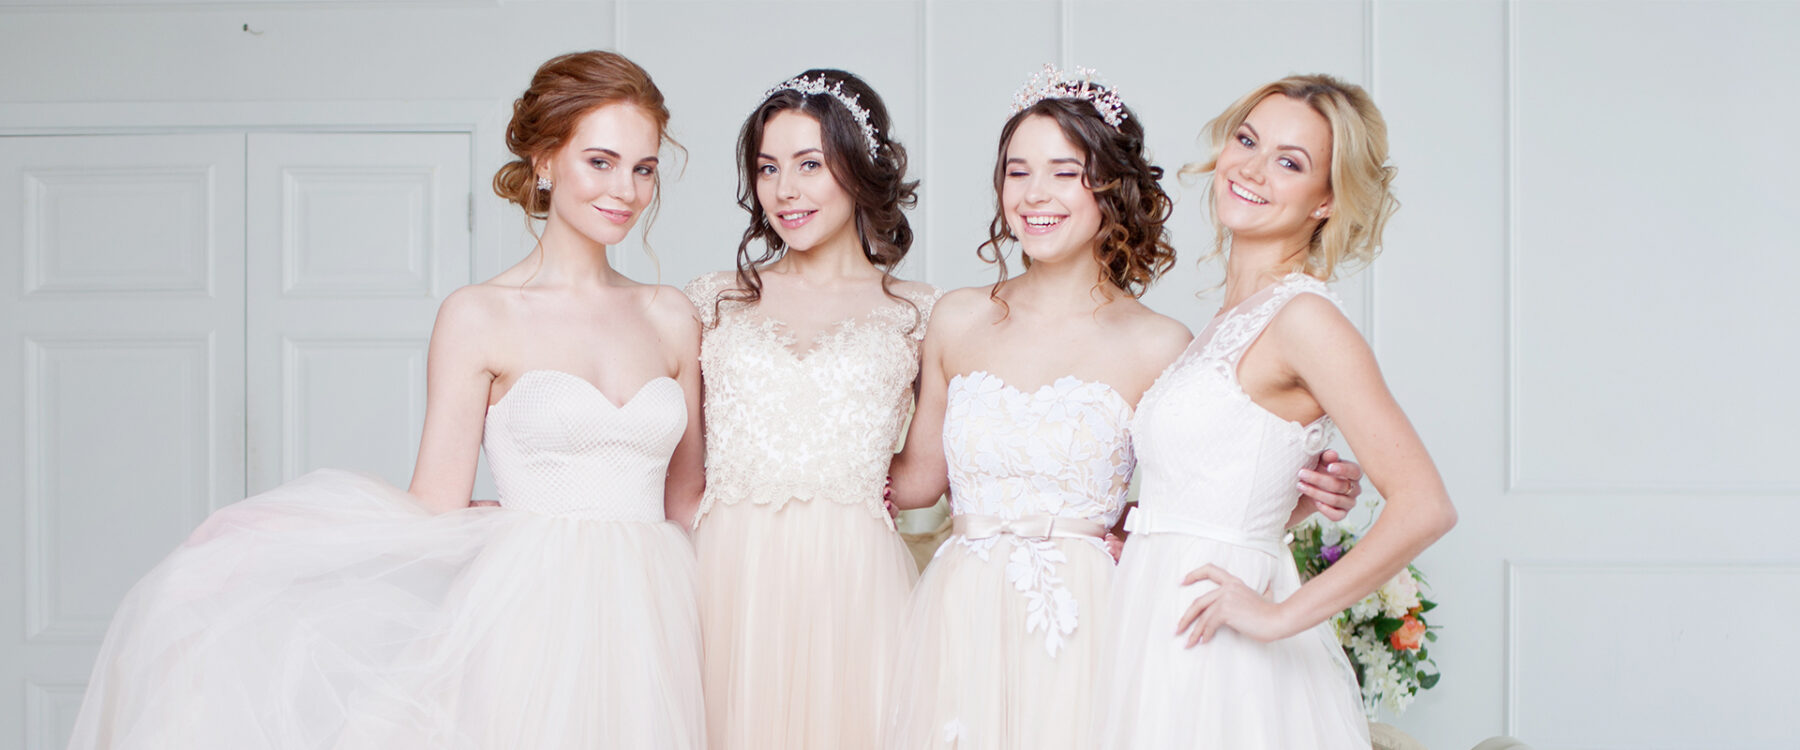 Brides wearing different shades of white wedding dresses